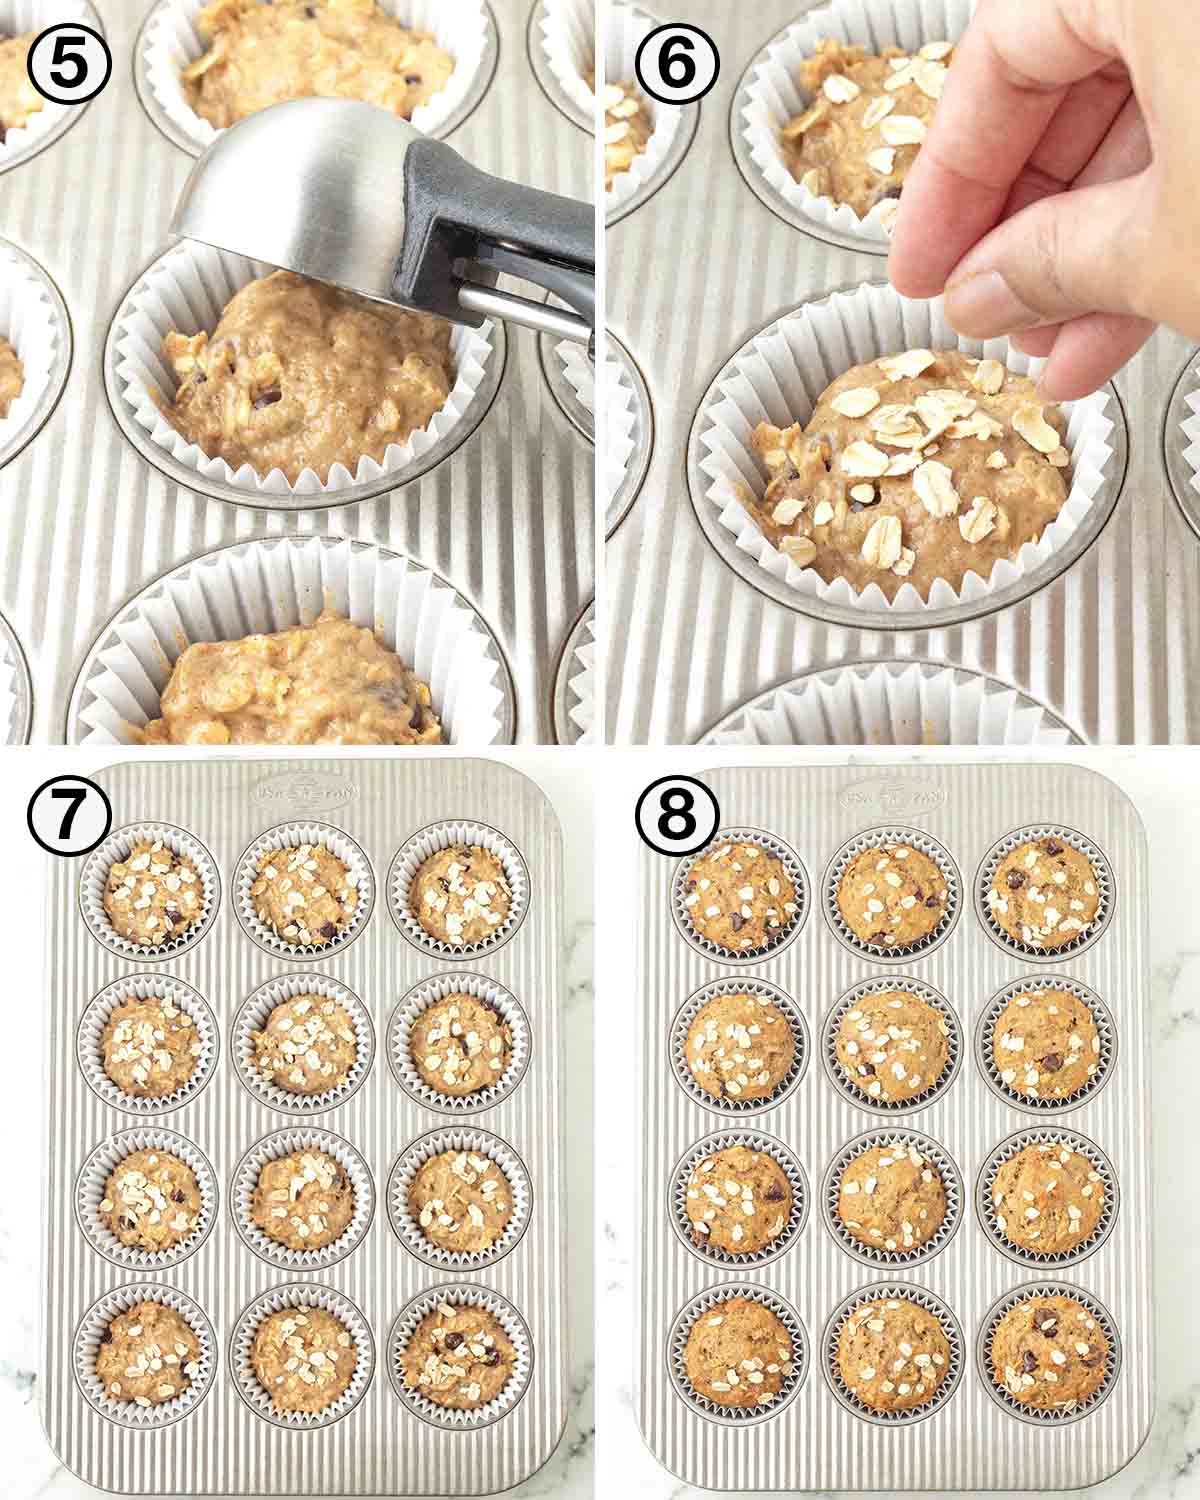 A collage of four images showing the second sequence of steps needed to make vegan banana oat muffins.